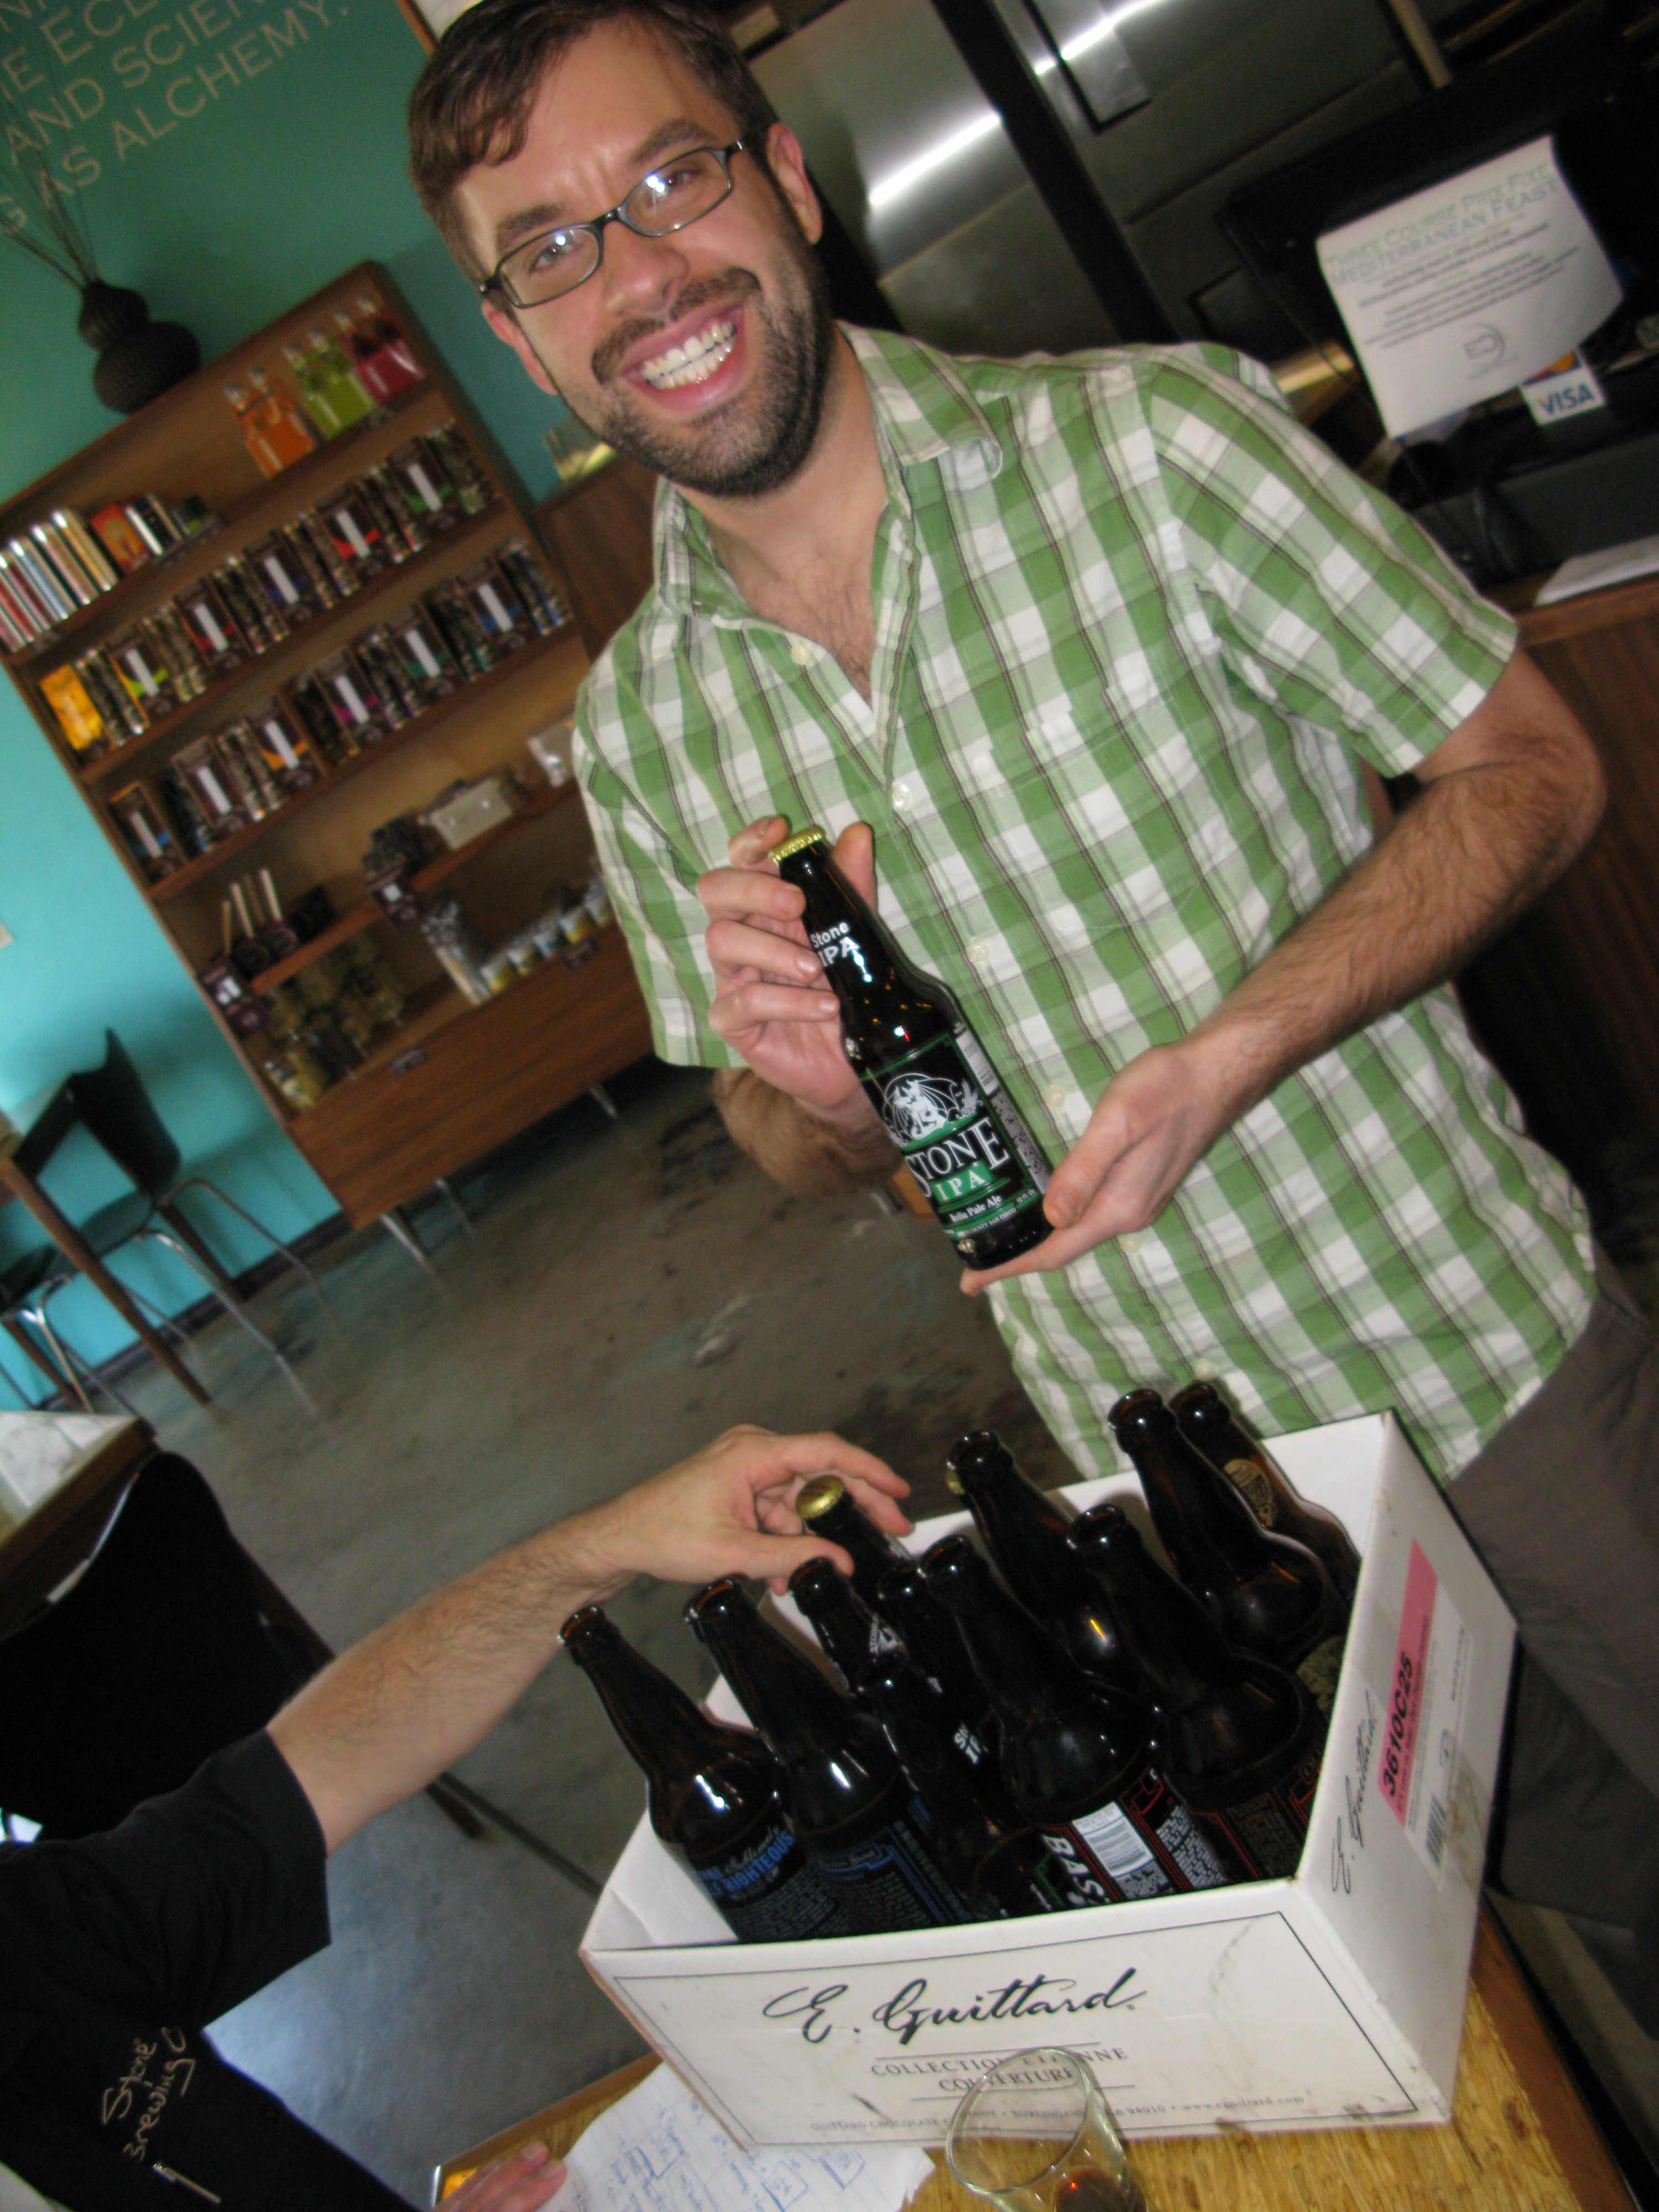 Eclipse Chocolat Owner, Will Gustwiller, now the proud owner of leftover Stone beer